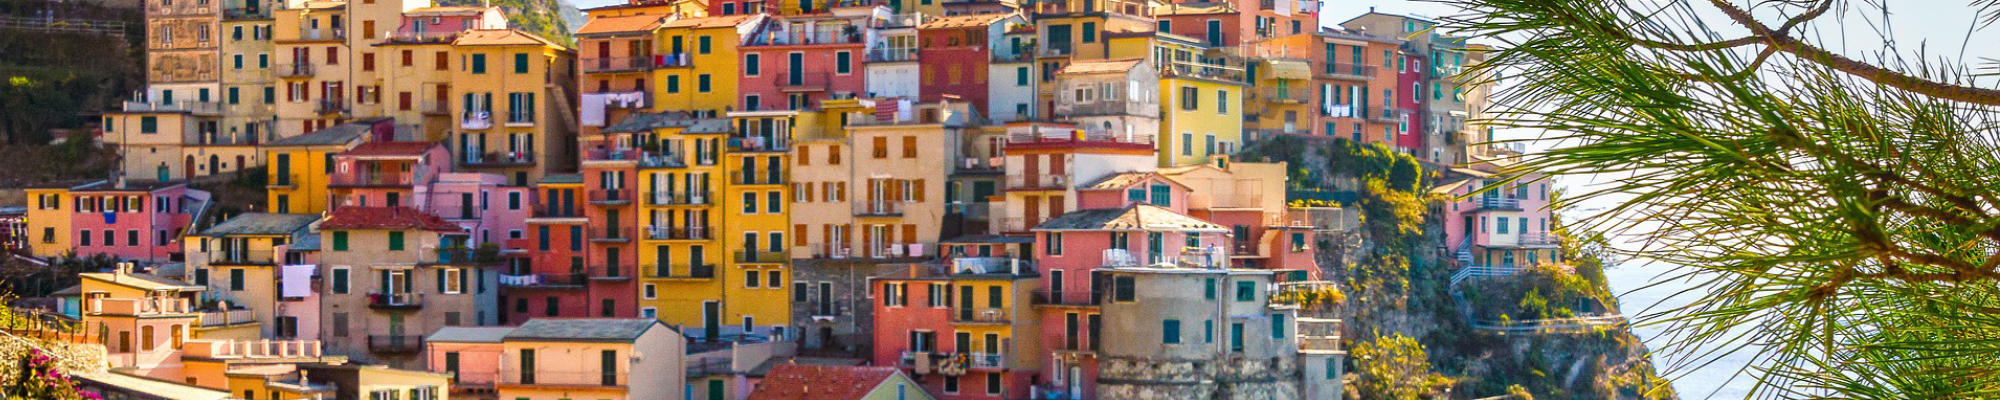 Brightly colored homes on hill on Italian coast